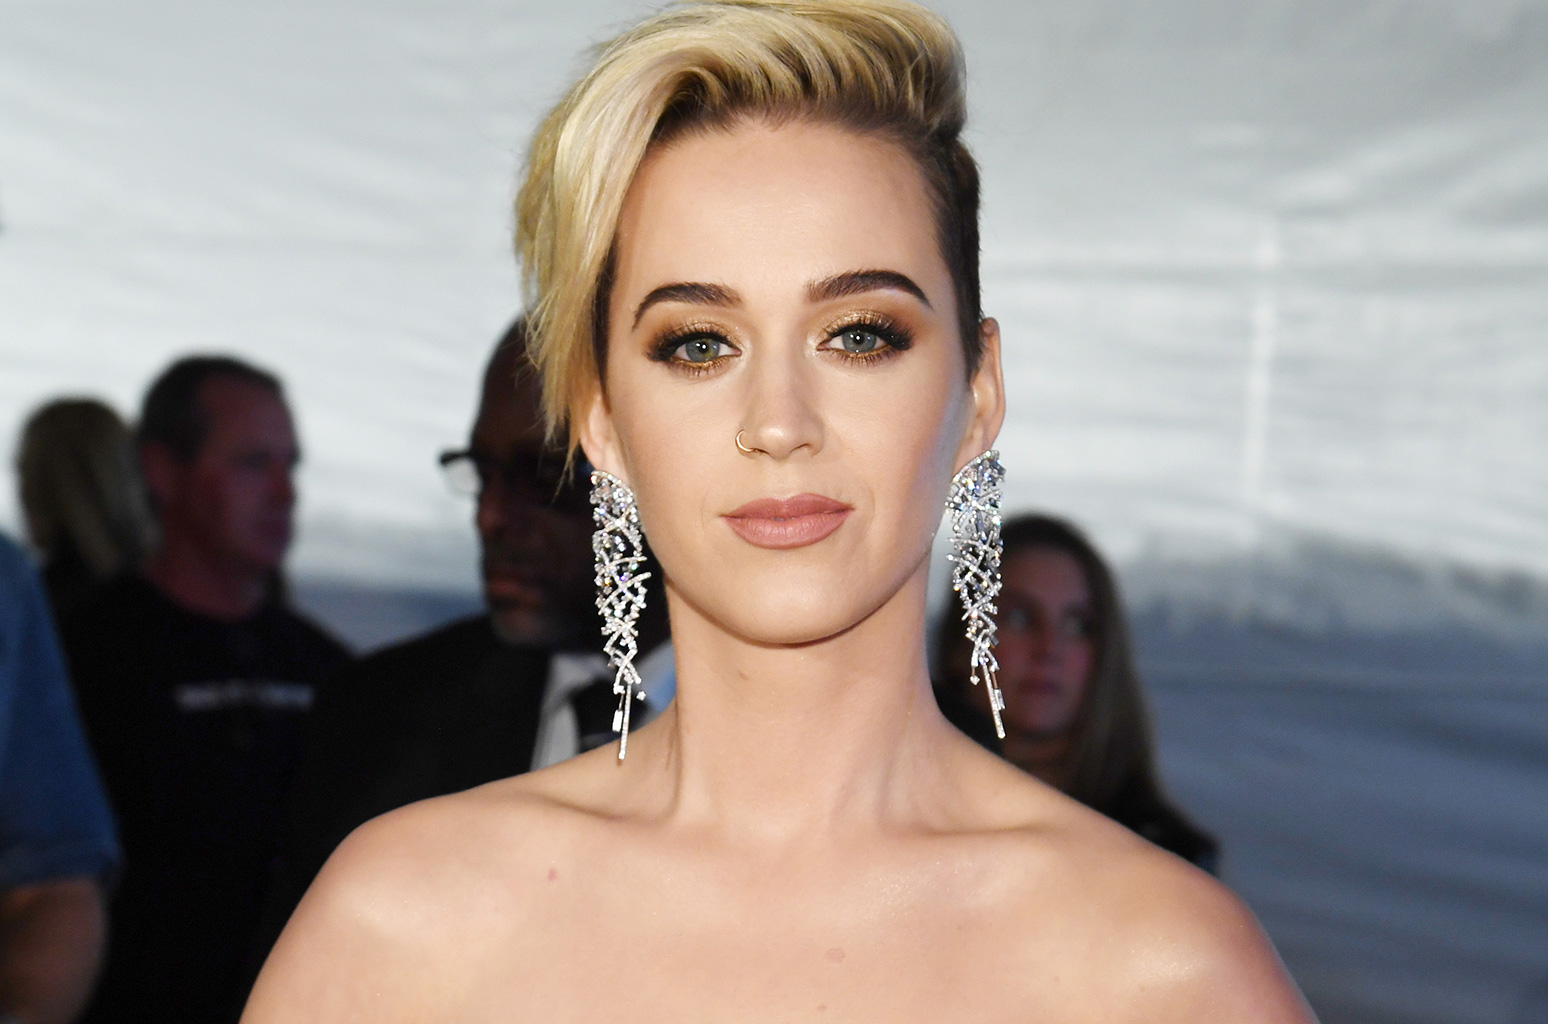 Katy Perry is the first Twitter user to hit 100 million followers (but has the most fakes in the Top 5)